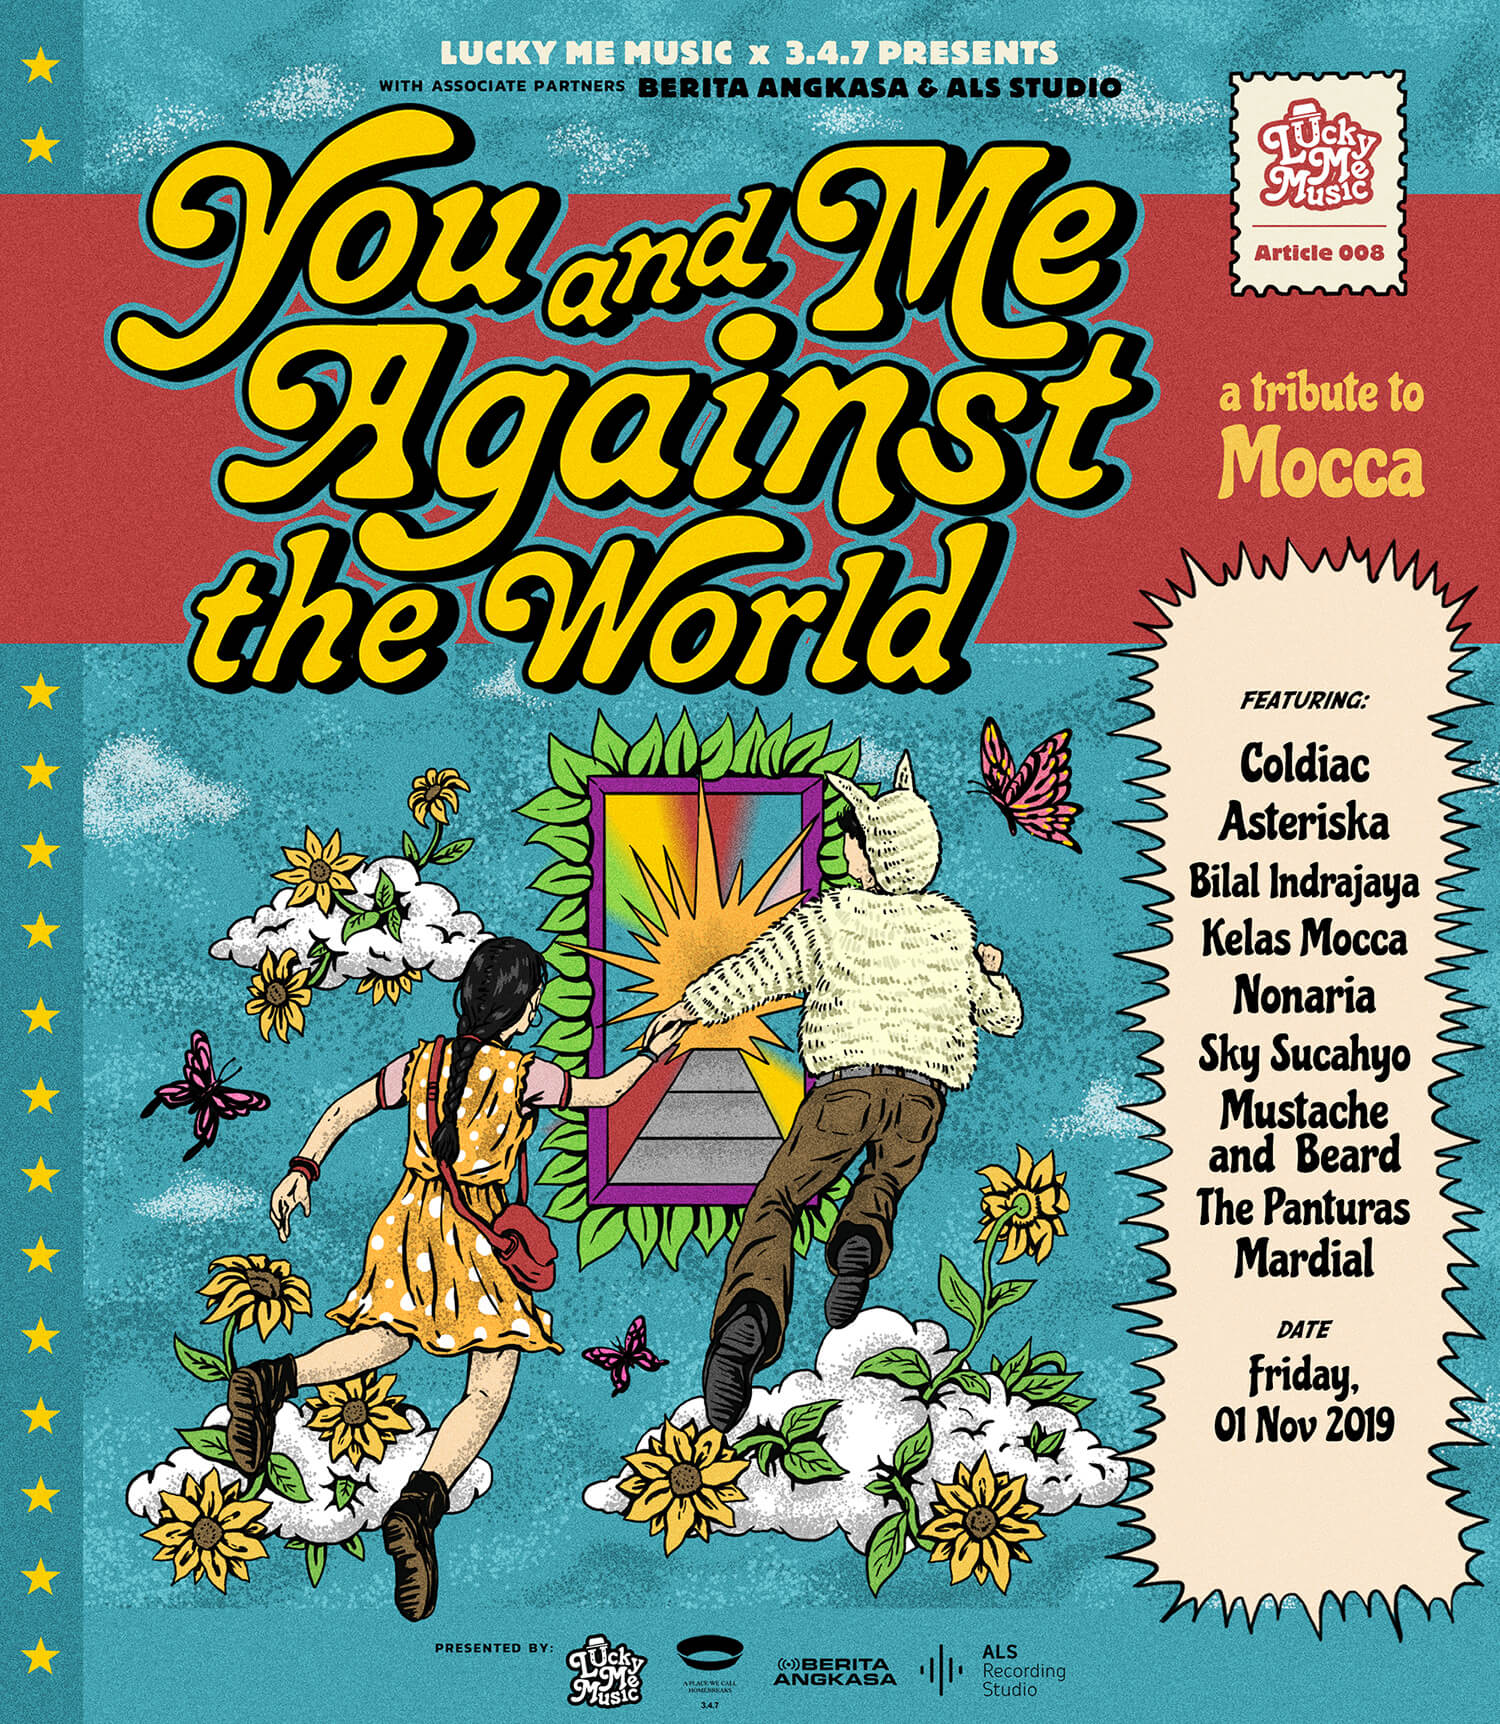 Mocca Gaet 9 Musisi dalam "You And Me Against The World: Tribute to Mocca"